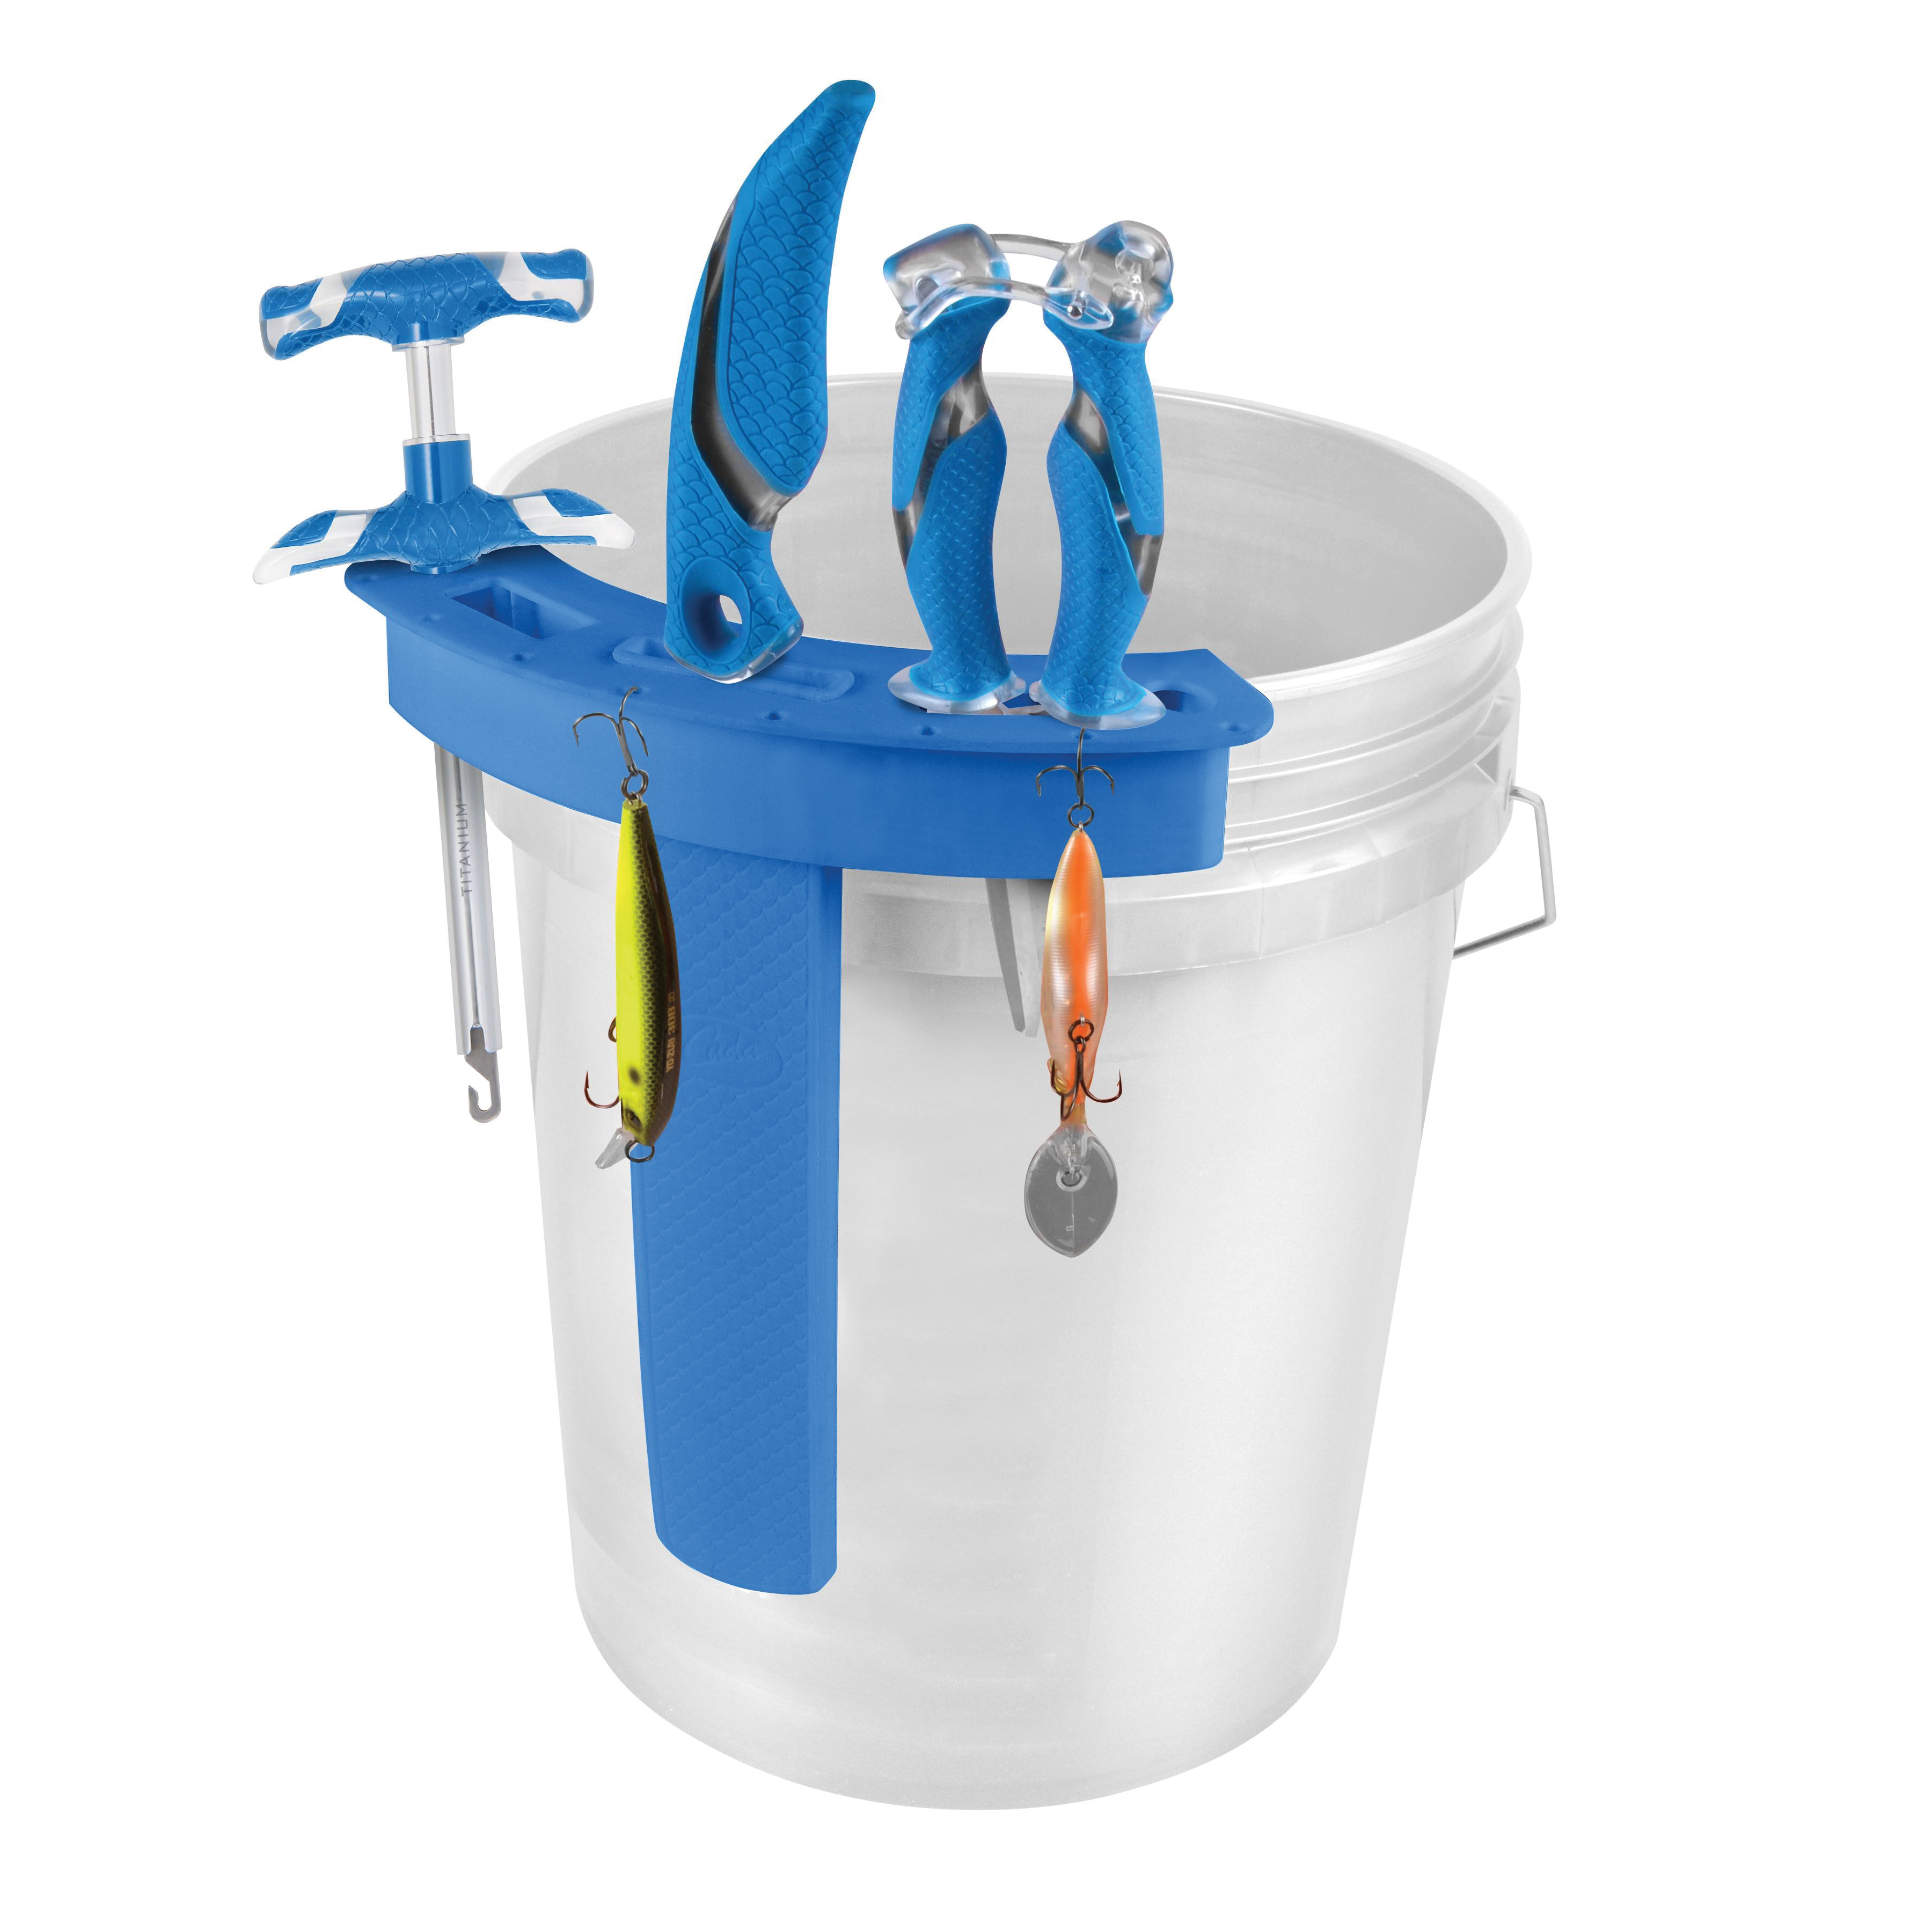 23018 Bucket Tackle Center with Integrated Hook Hole, Plastic/Rubber, White/Blue, For: 5 gal Buckets